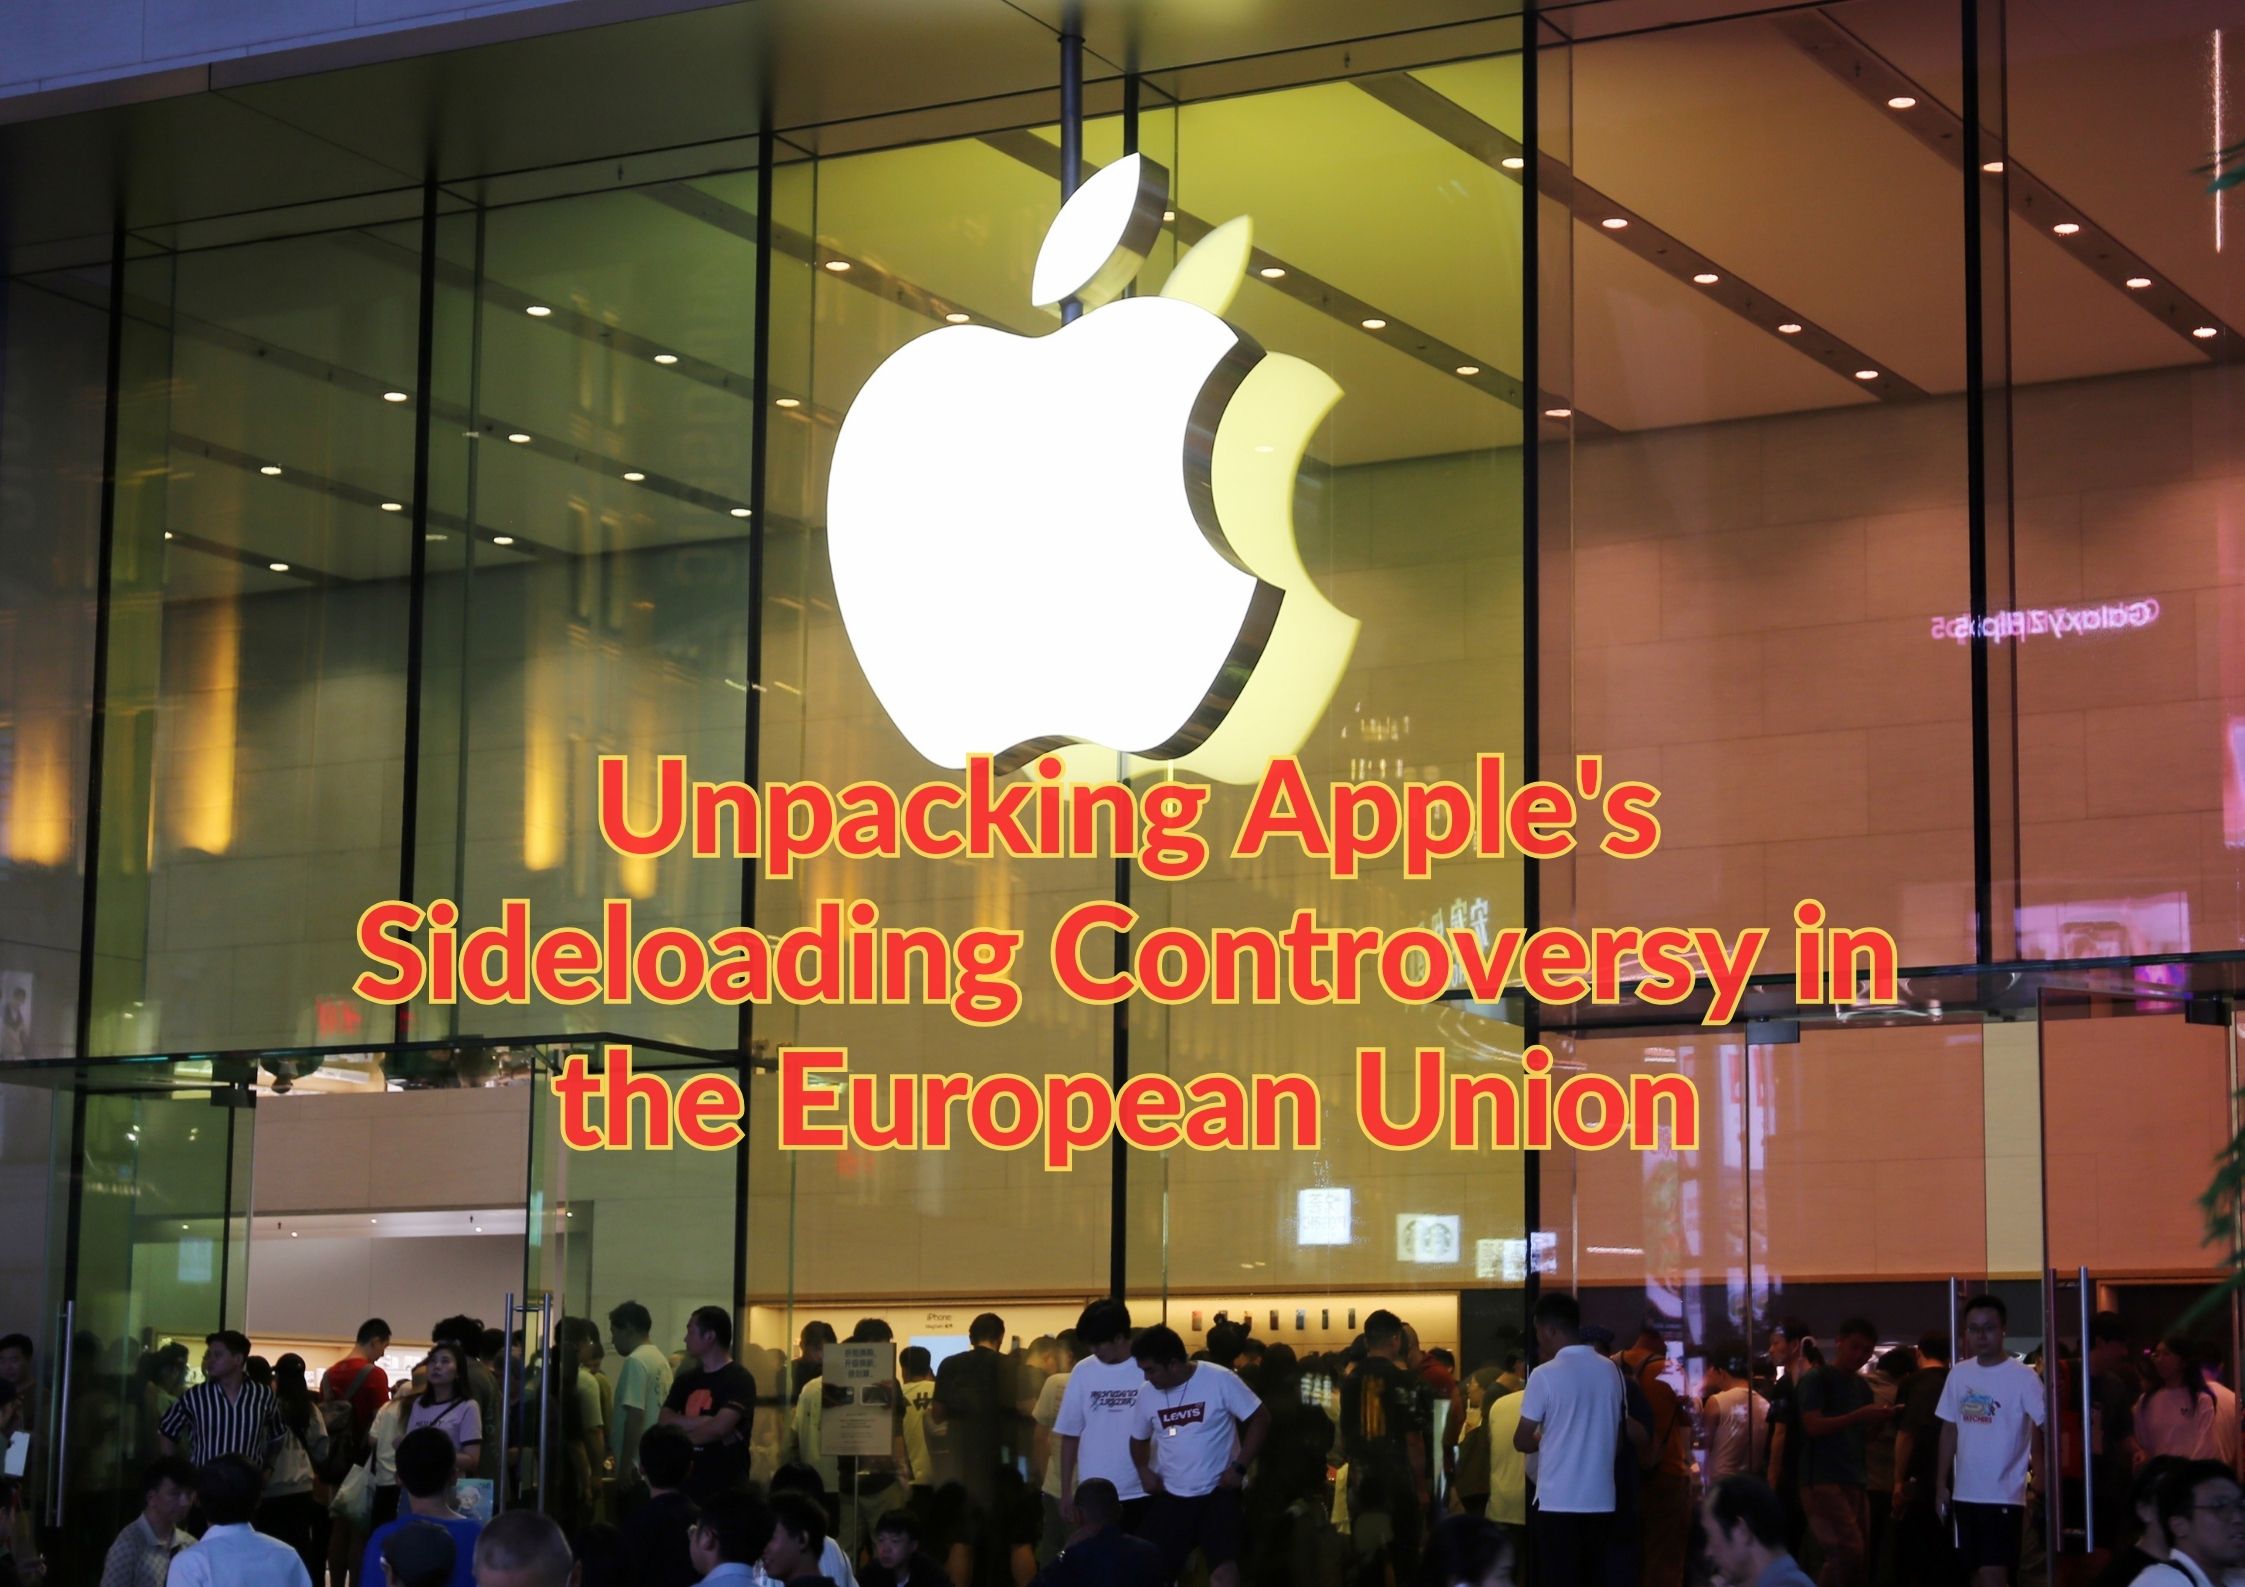 Unpacking Apple's Sideloading Controversy in the European Union